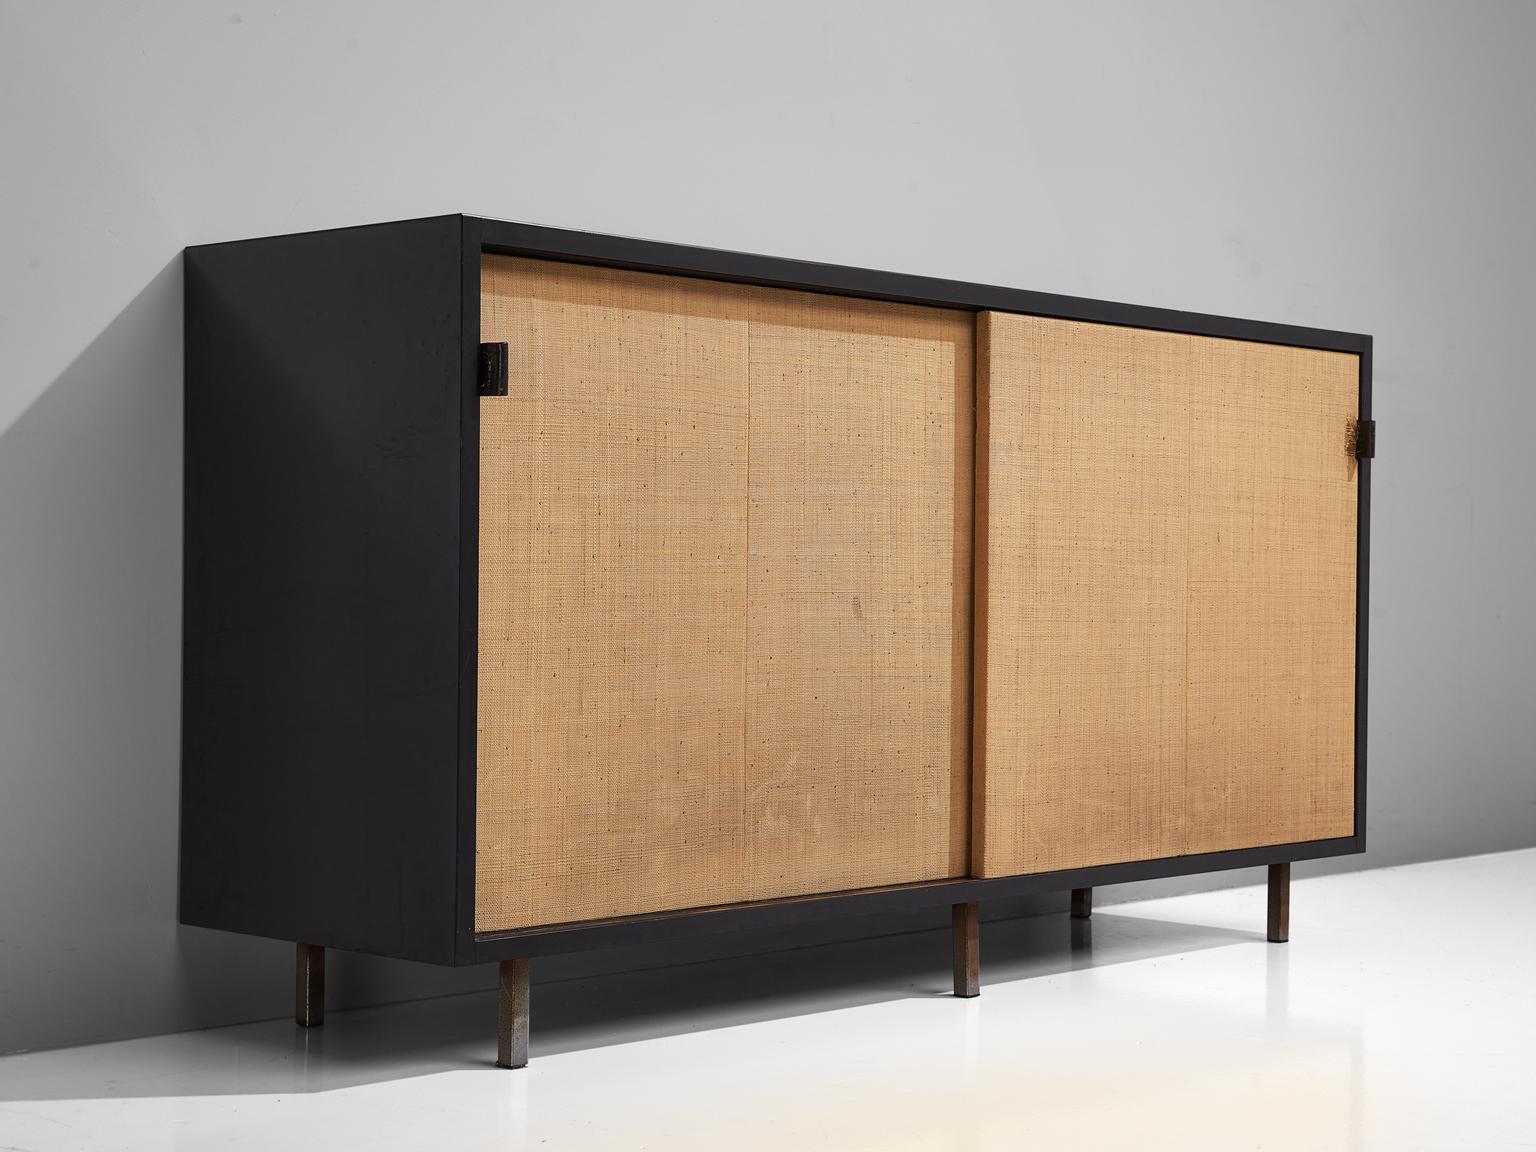 Florence Knoll for Knoll, sideboard, cane, ebonized wood, and metal, United States, 1961.

This sideboard is designed by Florence Knoll for Knoll International and was meant for the headquarters of Knoll in Italy. The credenza is executed with two